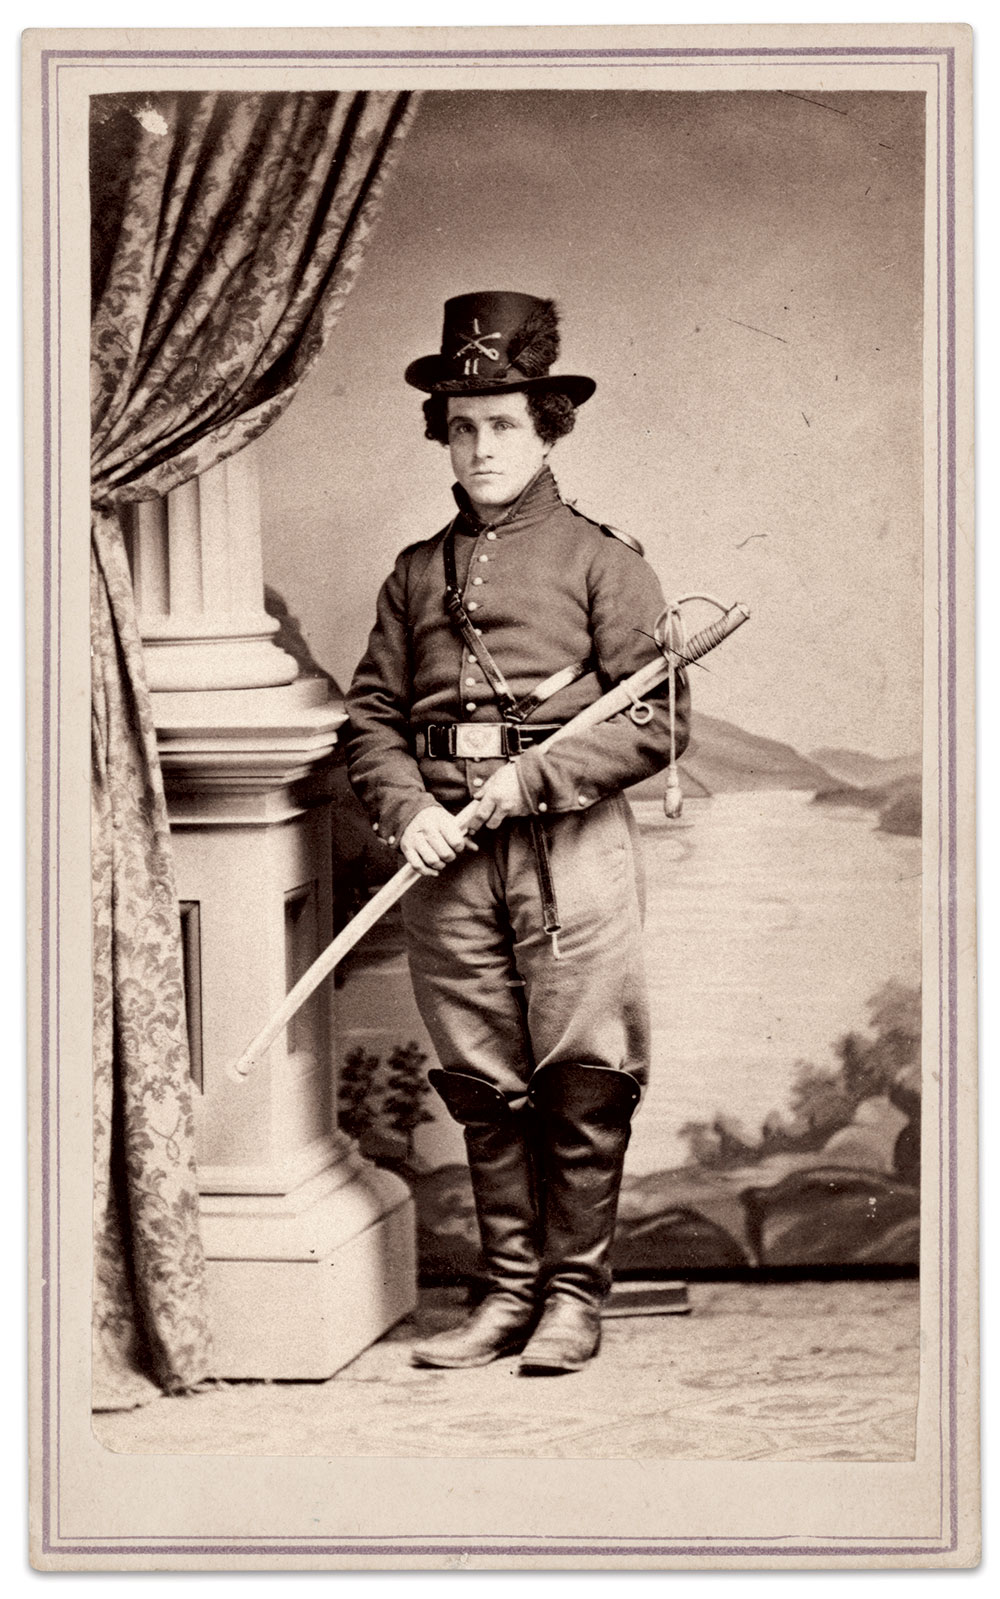 James Byron Holden of the 1st Vermont Cavalry. His company commander, Capt. Selah Perkins, remembered him as “brave, quiet, and true.” Carte de visite by Francis Mowrey of Rutland, Vt. The Liljenquist Family Collection at the Library of Congress.